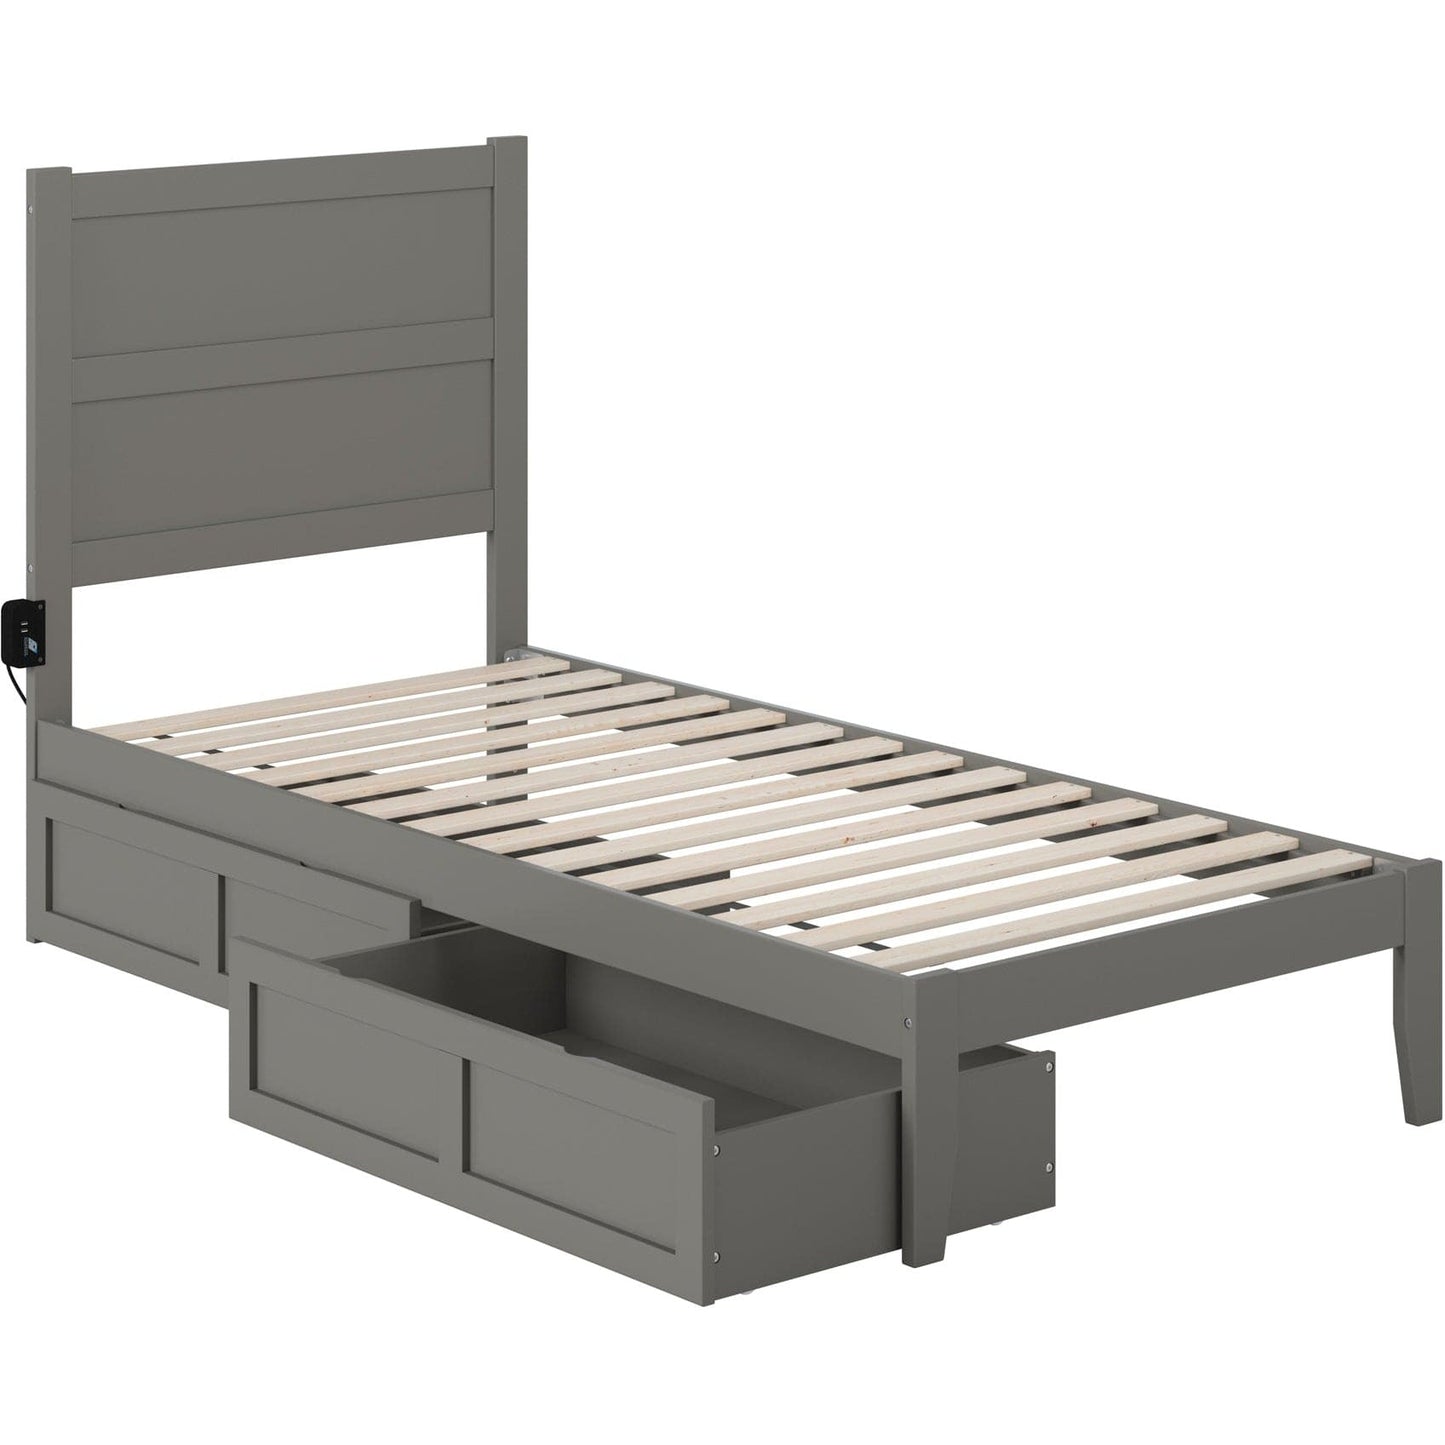 AFI Furnishings NoHo Twin Extra Long Bed with 2 Drawers in Grey AG9113419